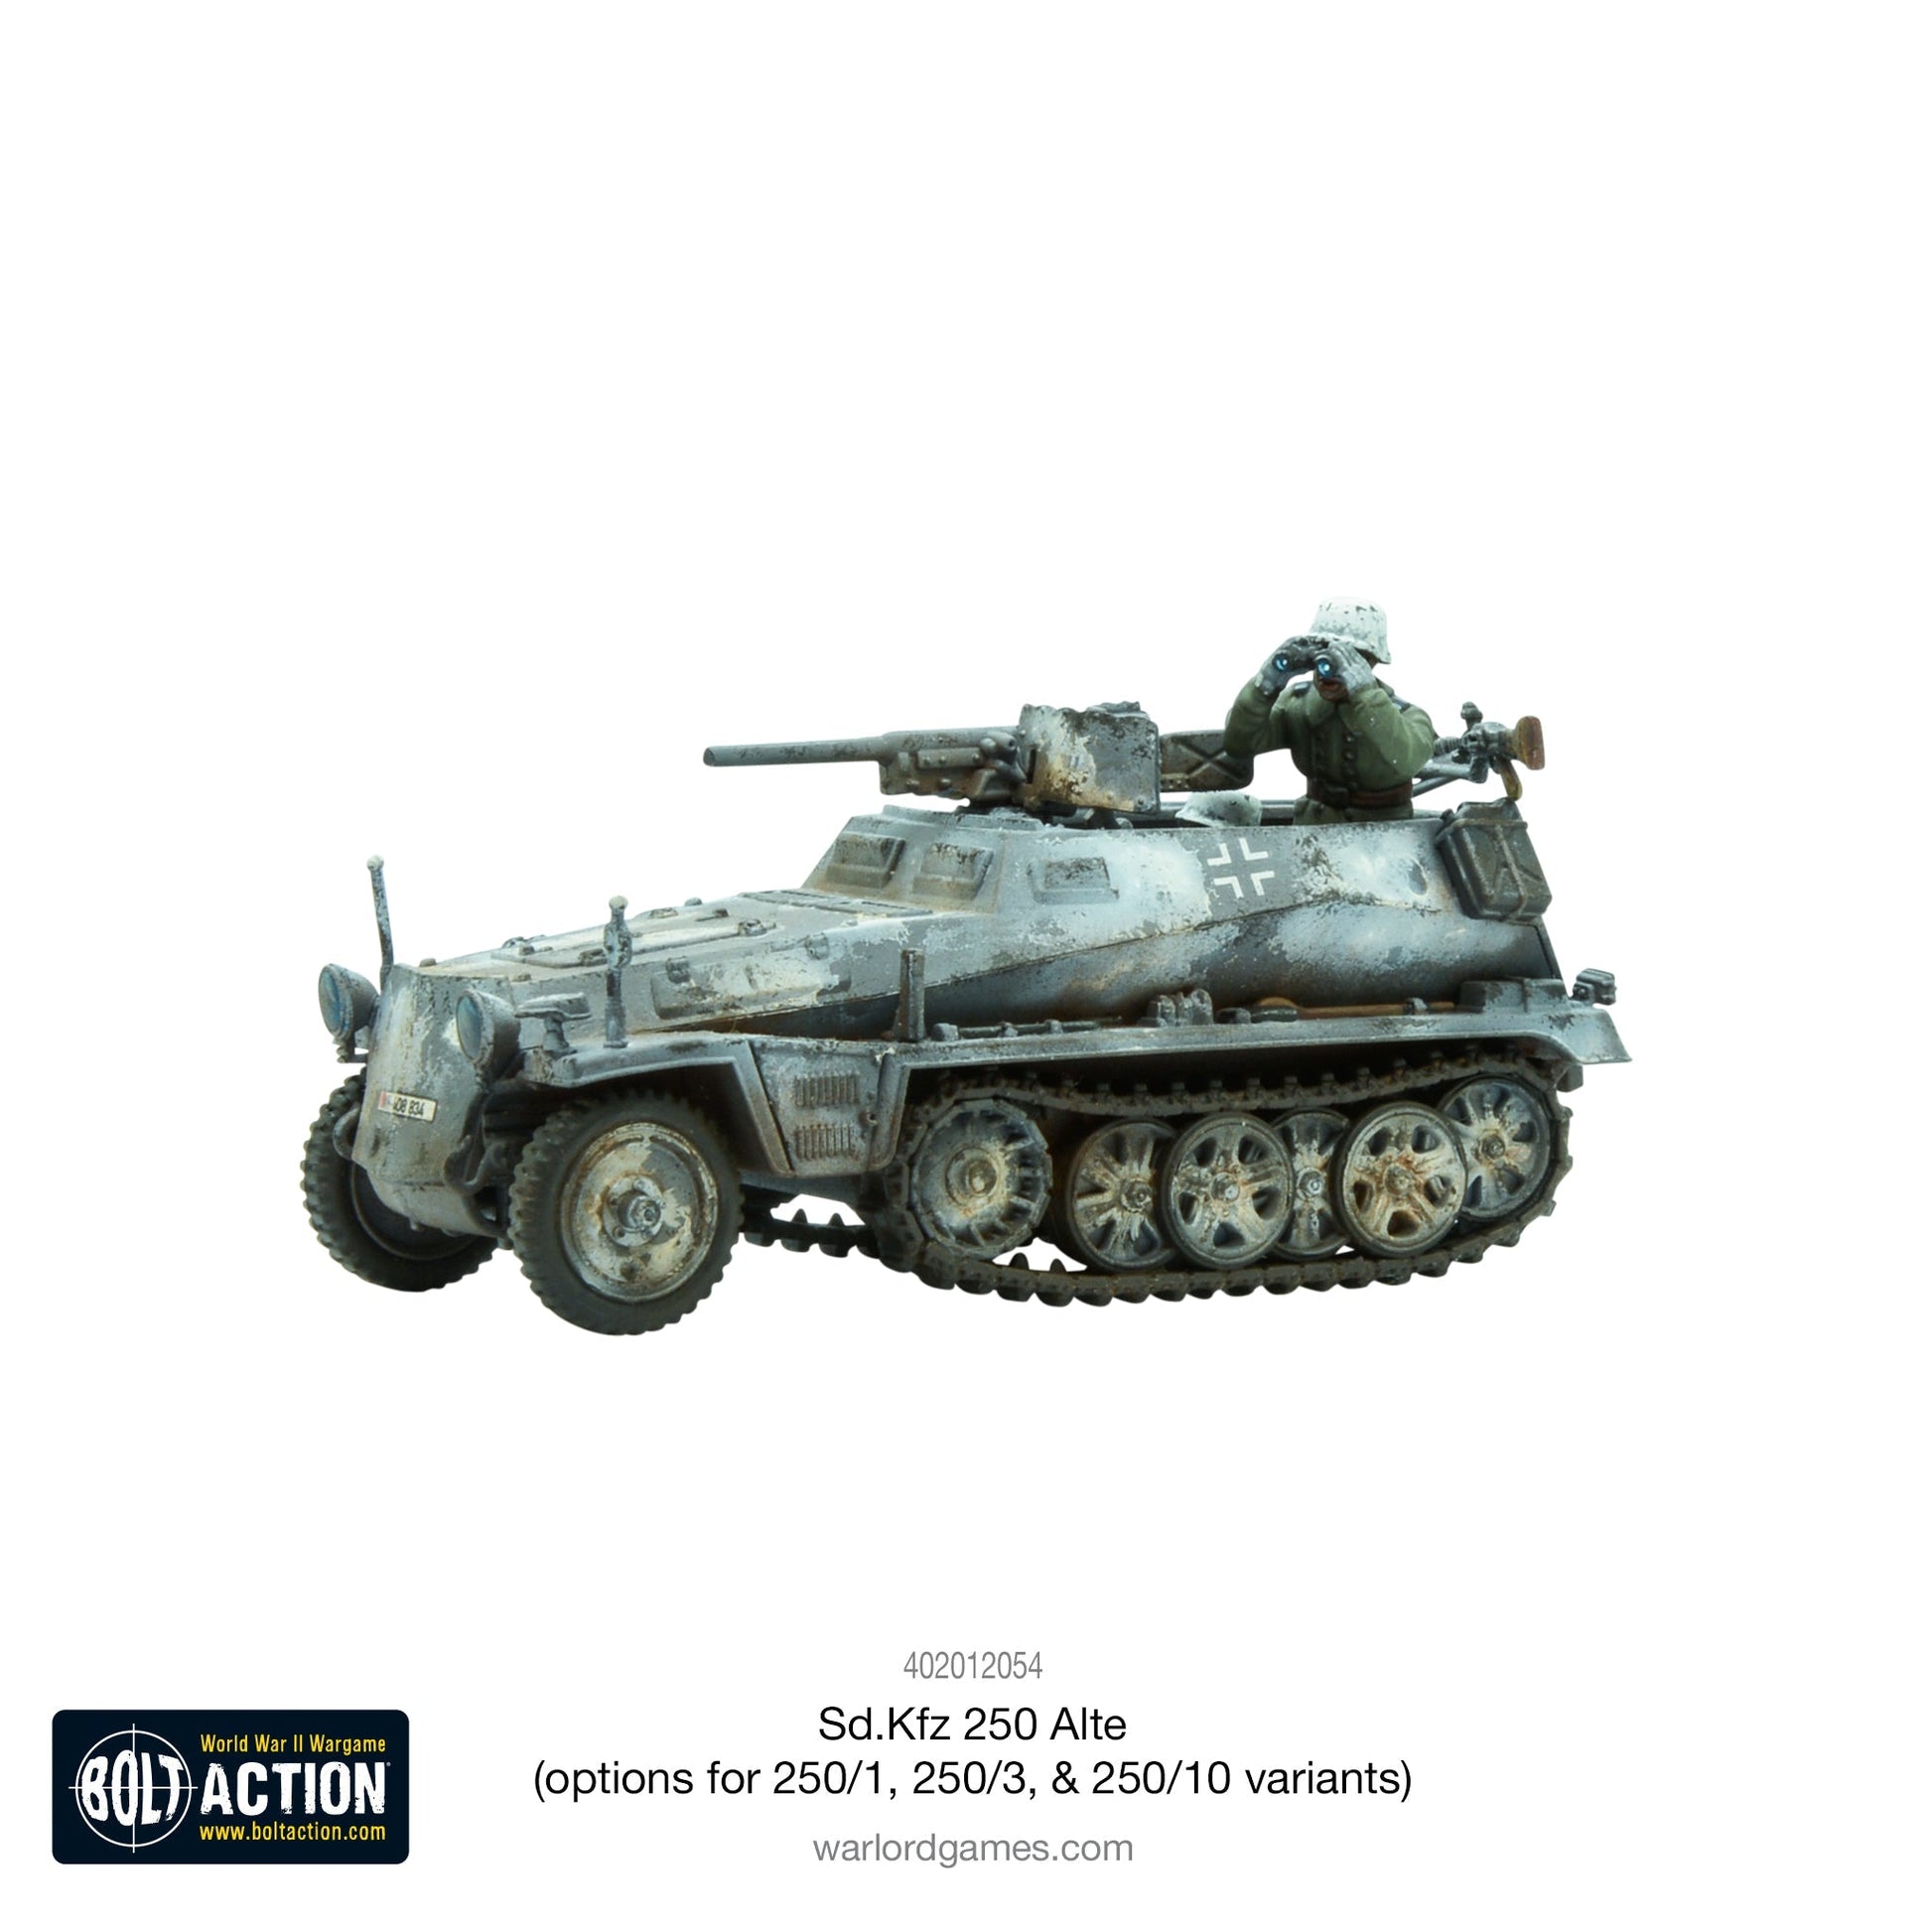 Bolt Action - Germany: Sd.Kfz 250 (Alte) half-track (options to make 250/1, 250/3 or 250/10 variants)